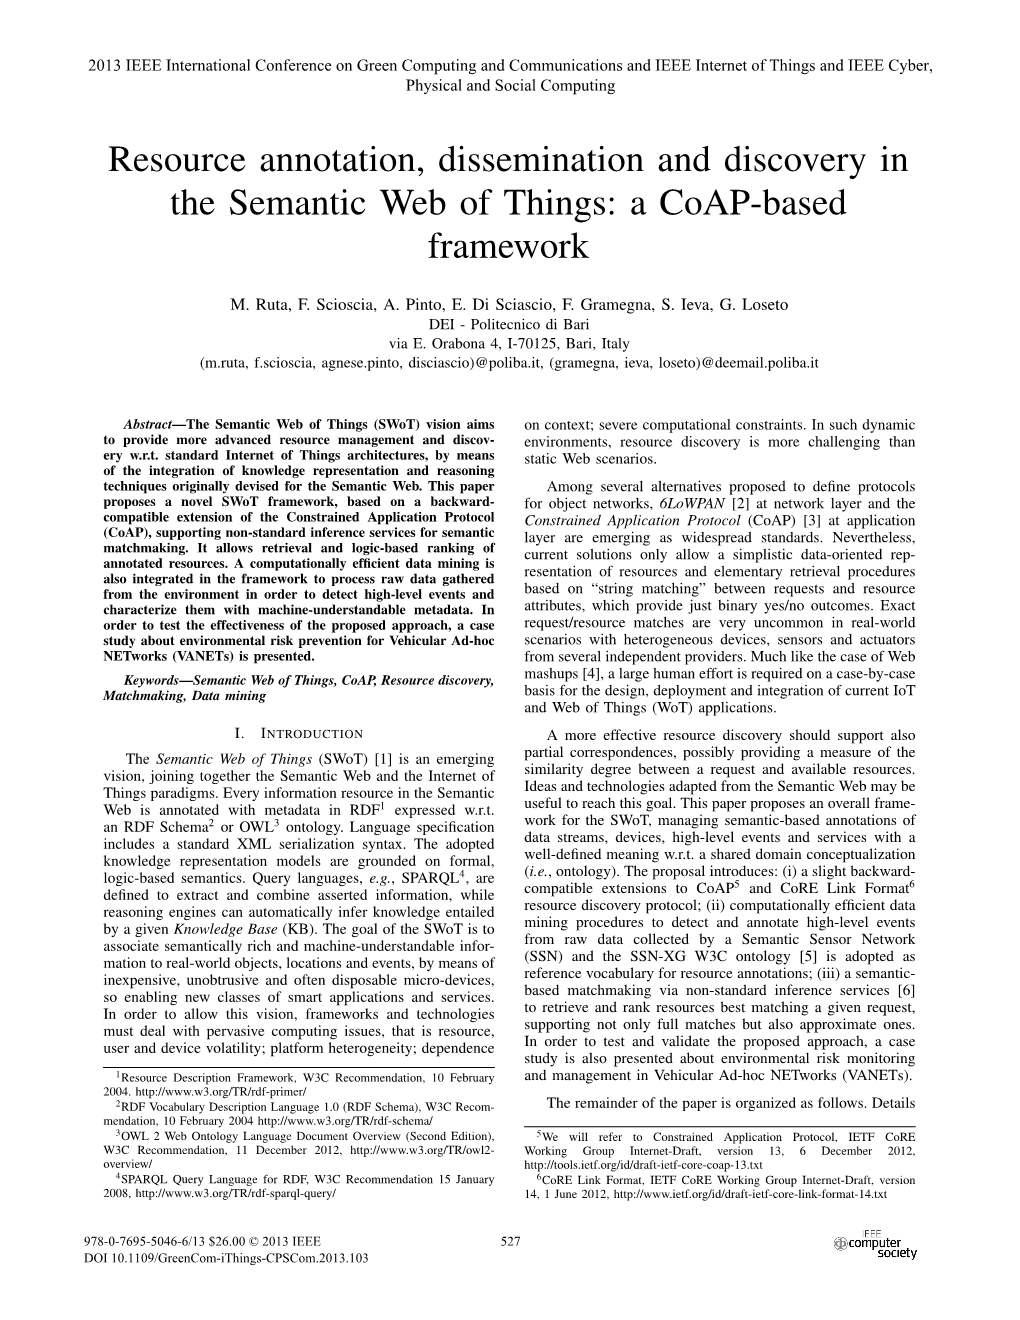 Resource Annotation, Dissemination and Discovery in the Semantic Web of Things: a Coap-Based Framework